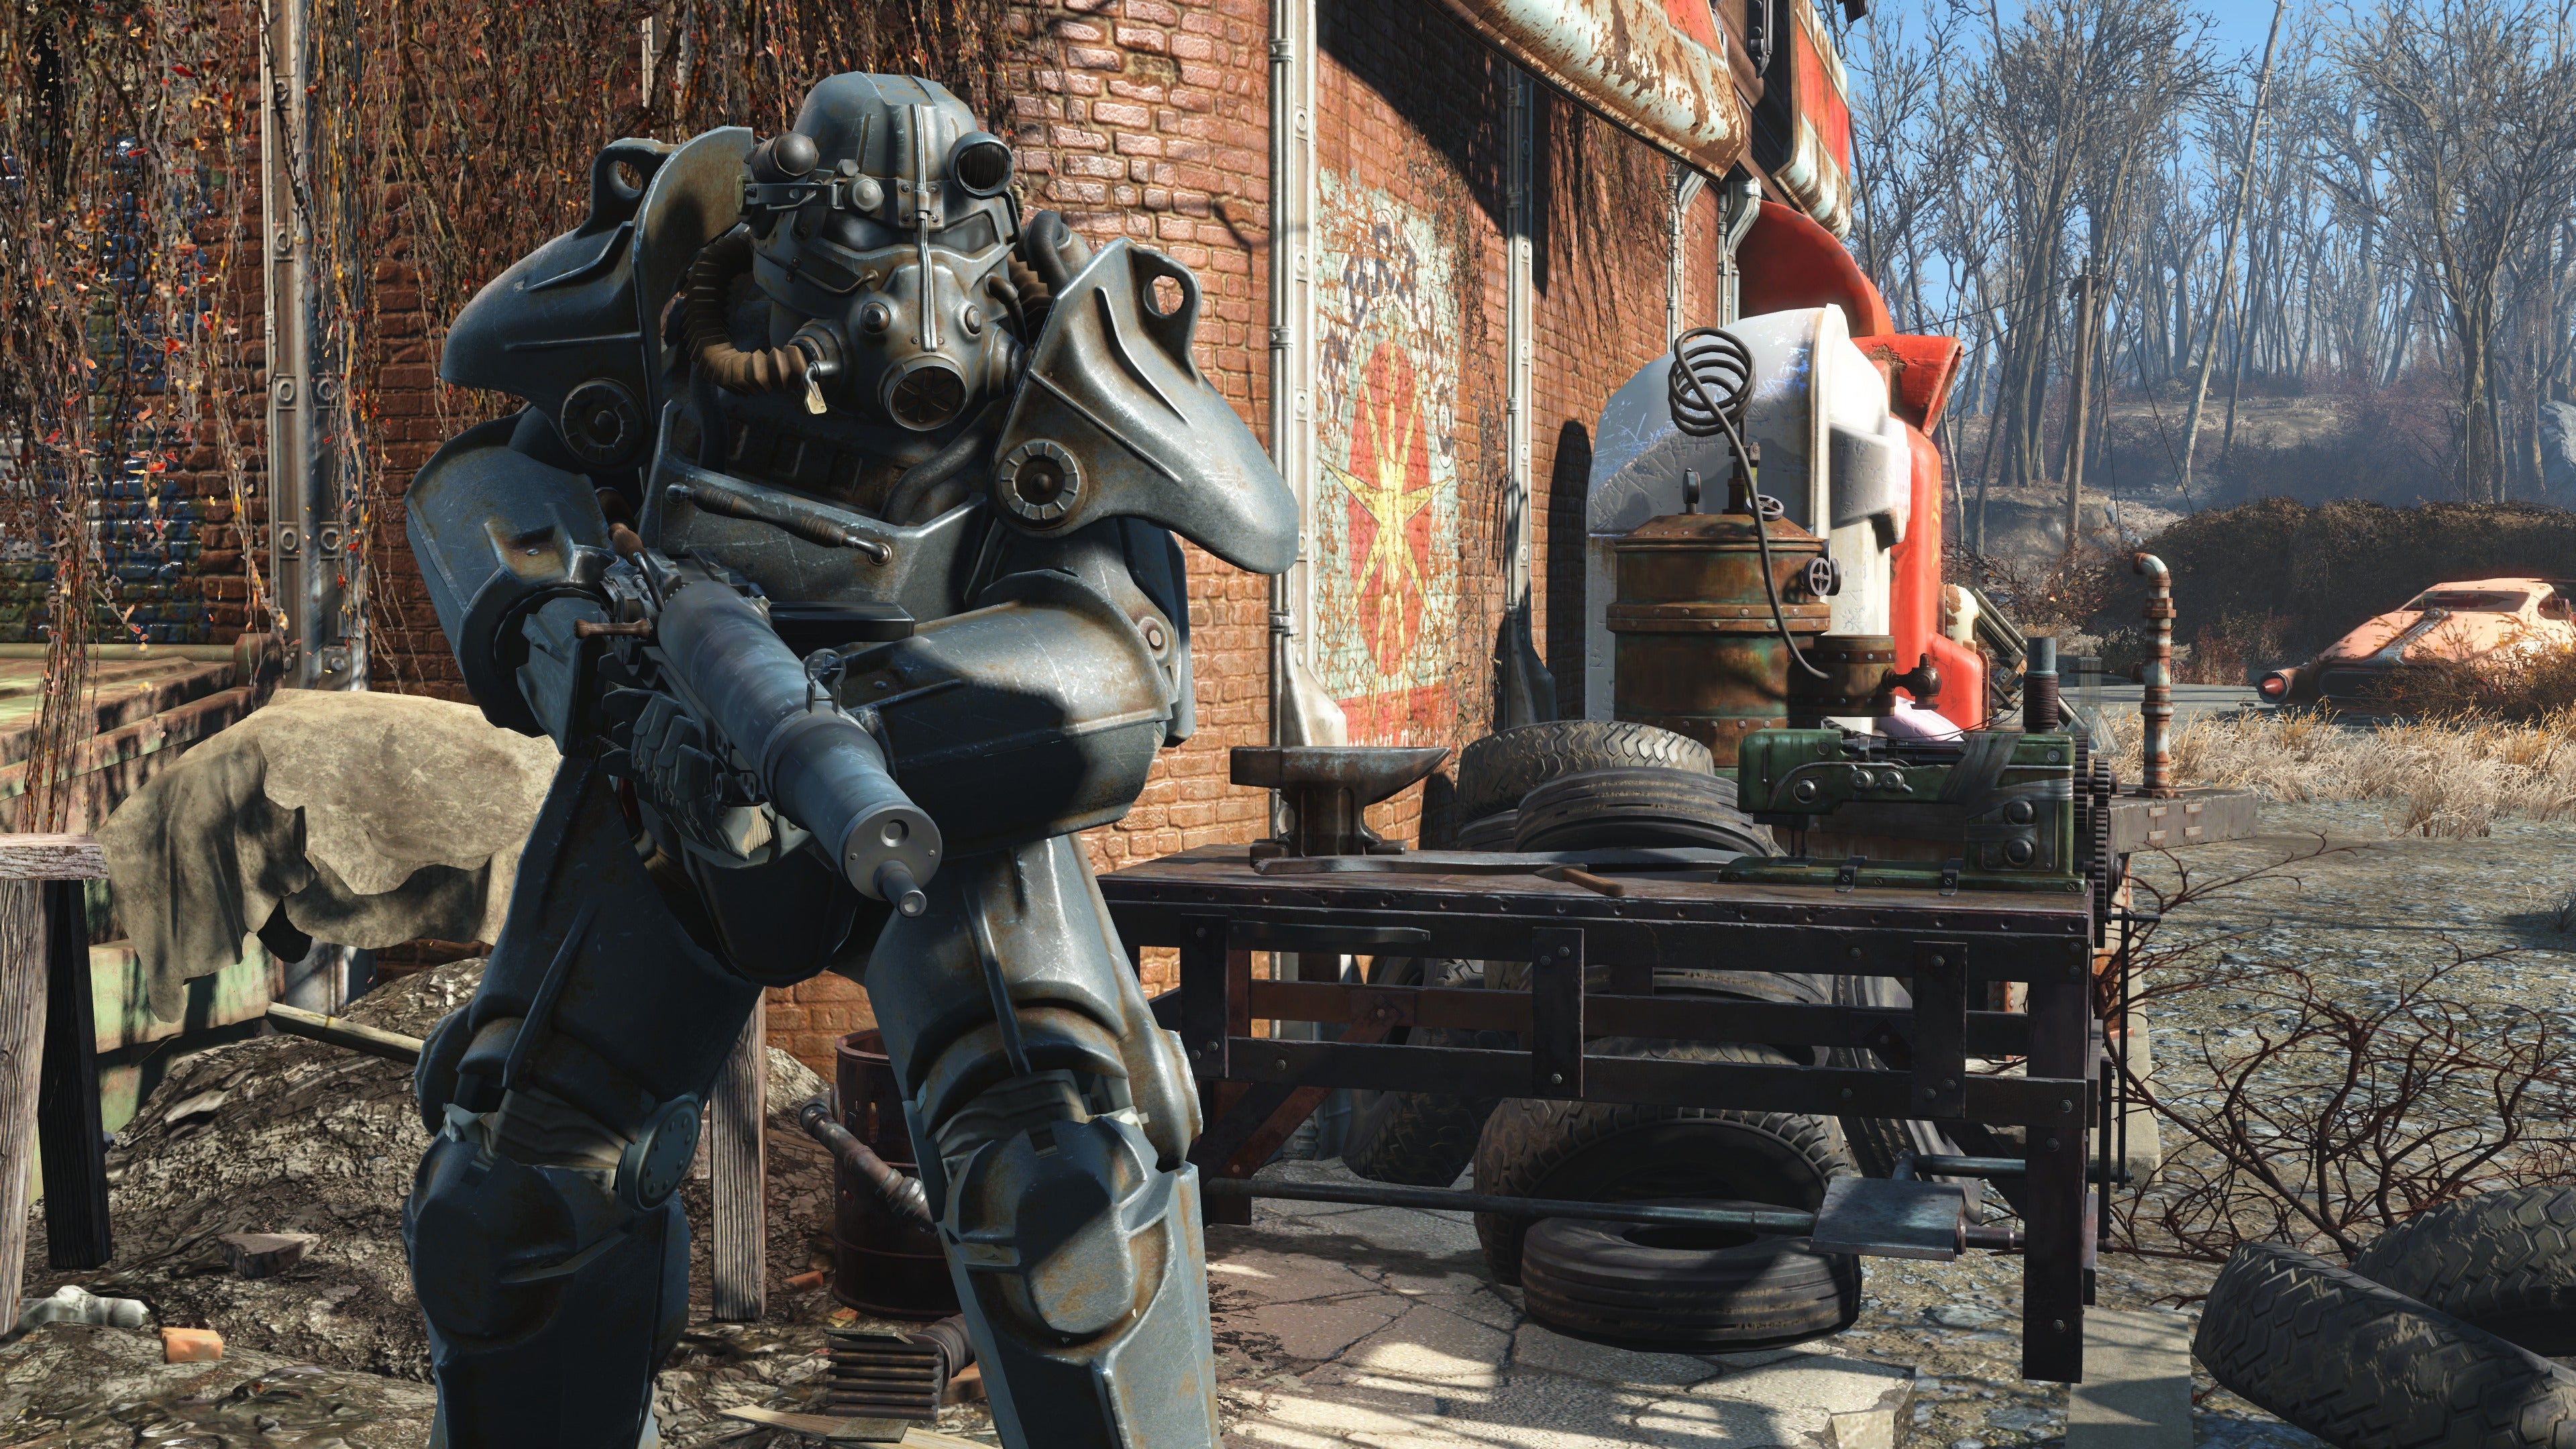 Fallout 4s Free High Resolution Texture Pack Will Make Even